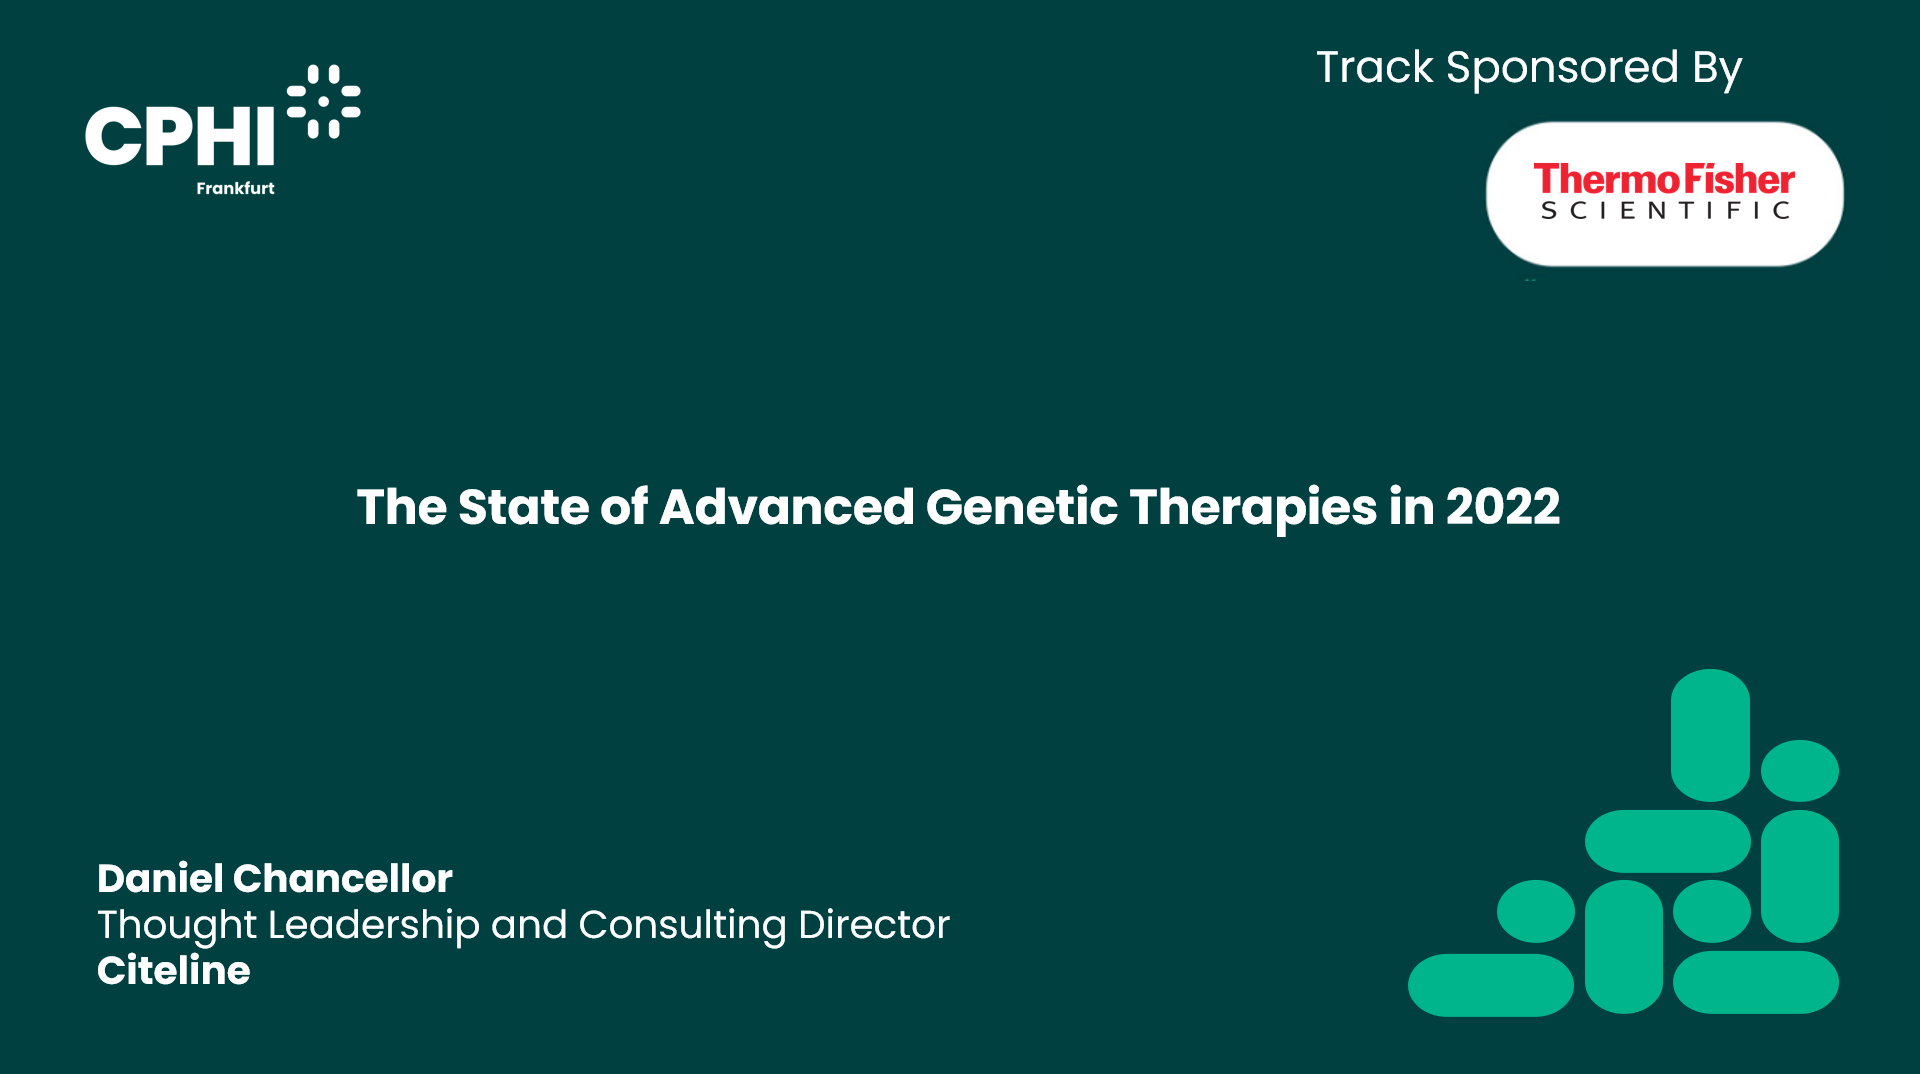 The State of Advanced Genetic Therapies in 2022